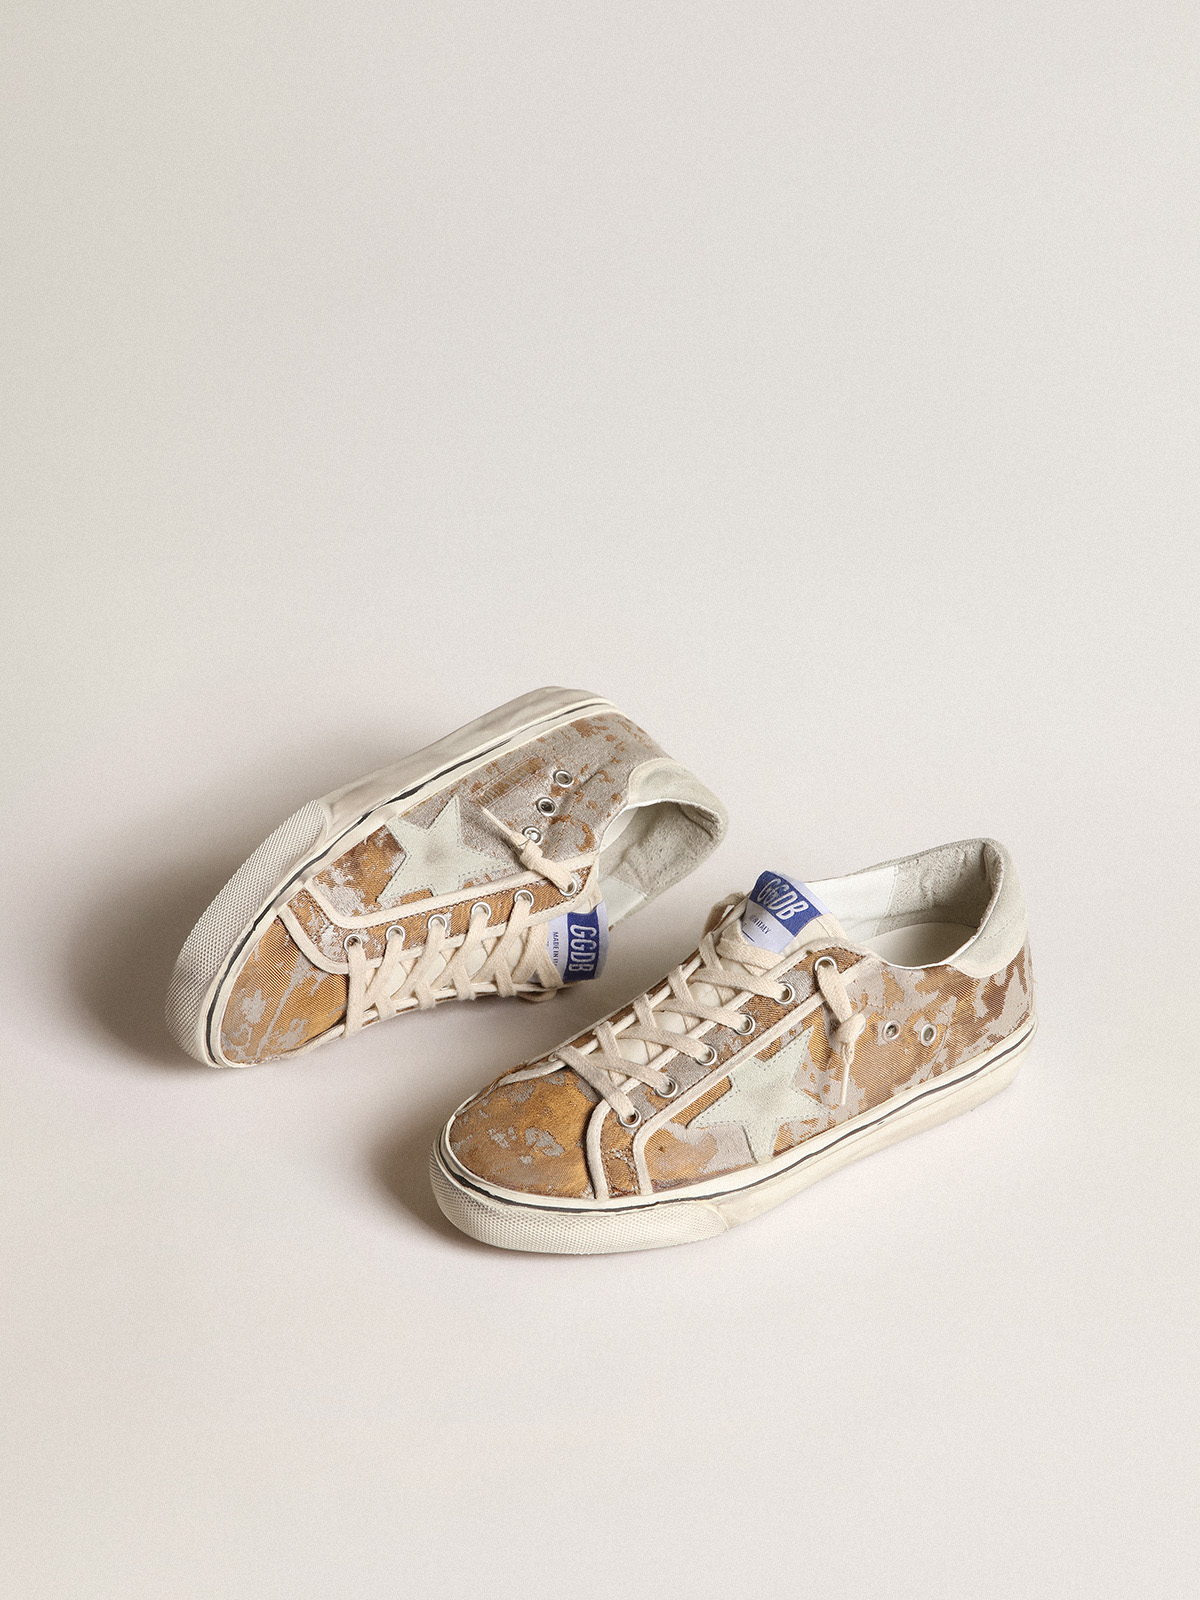 Hi Star in bronze jacquard fabric with ice-gray suede star | Golden Goose